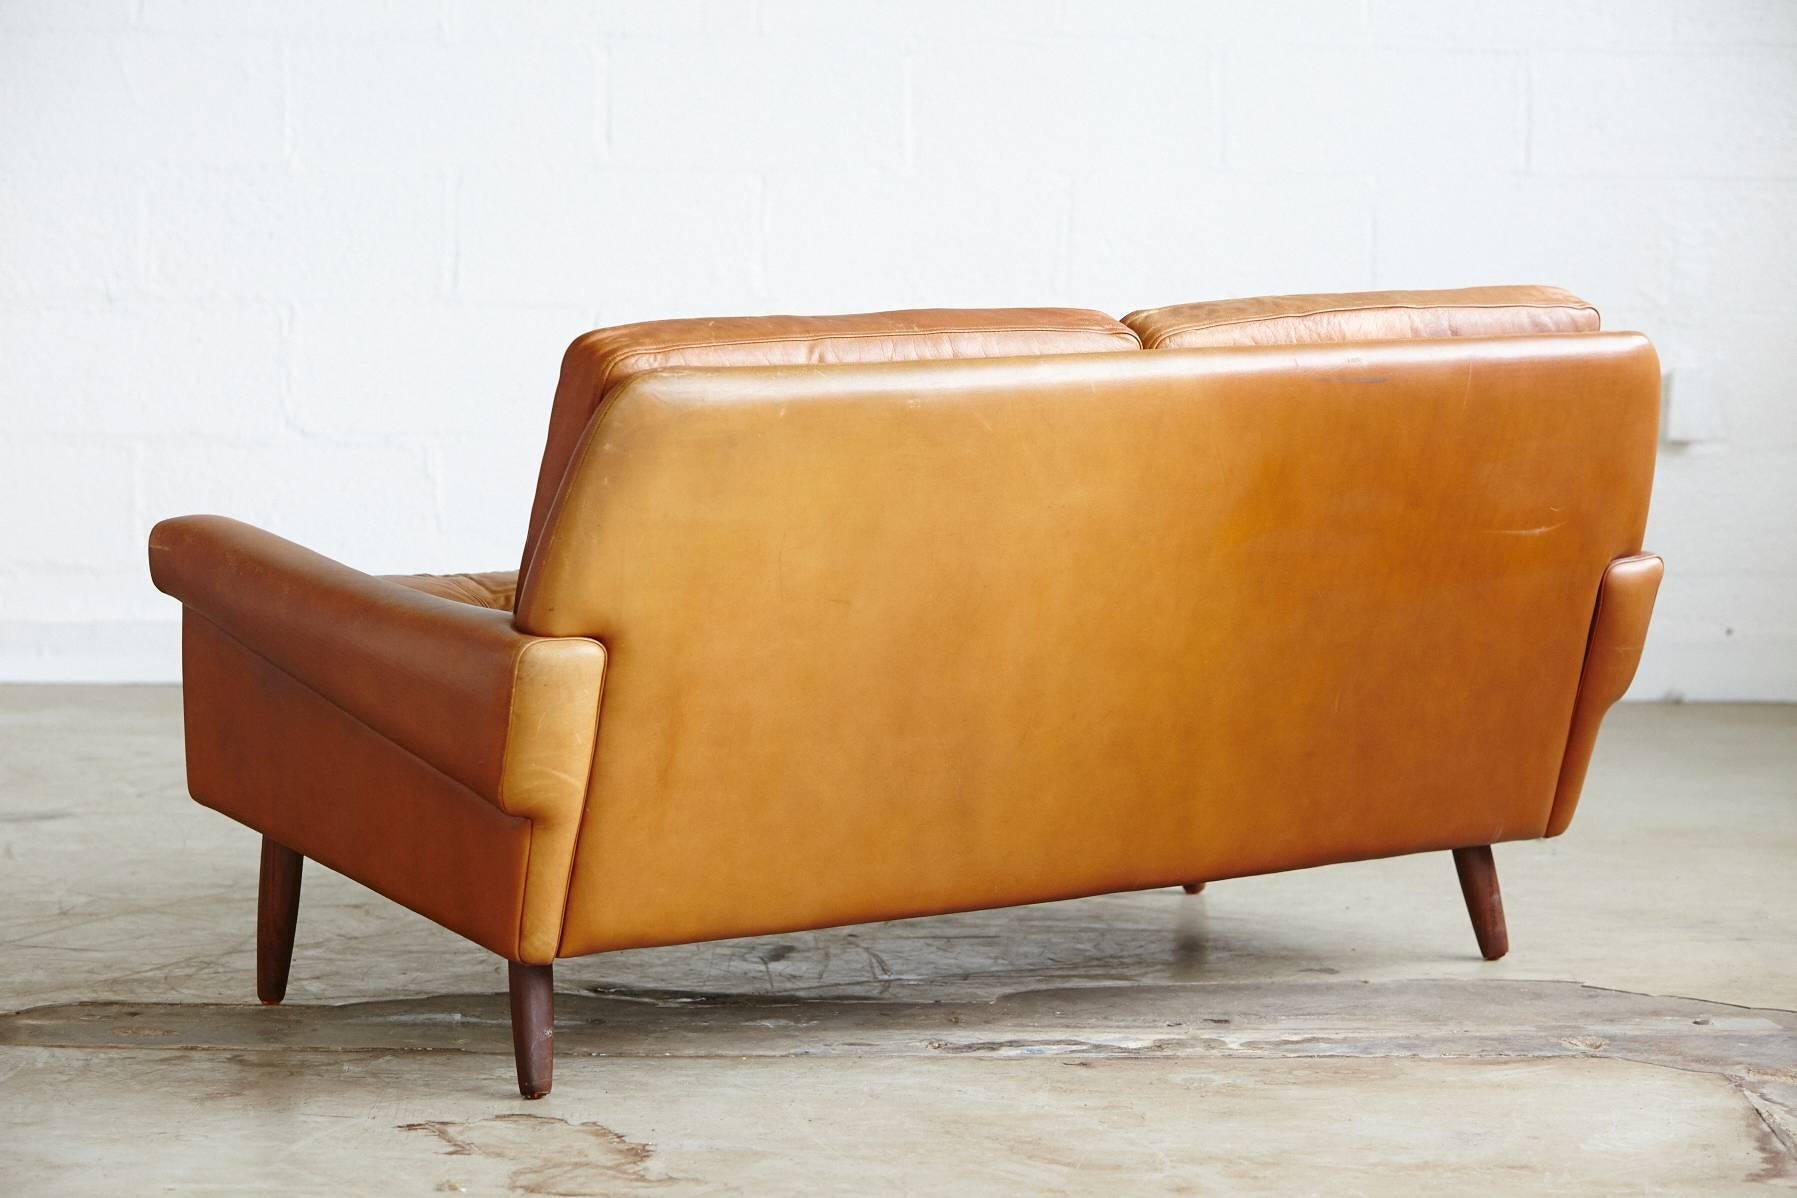 Scandinavian Modern Two-Seat Danish Leather Sofa by Svend Skipper from the 1960s